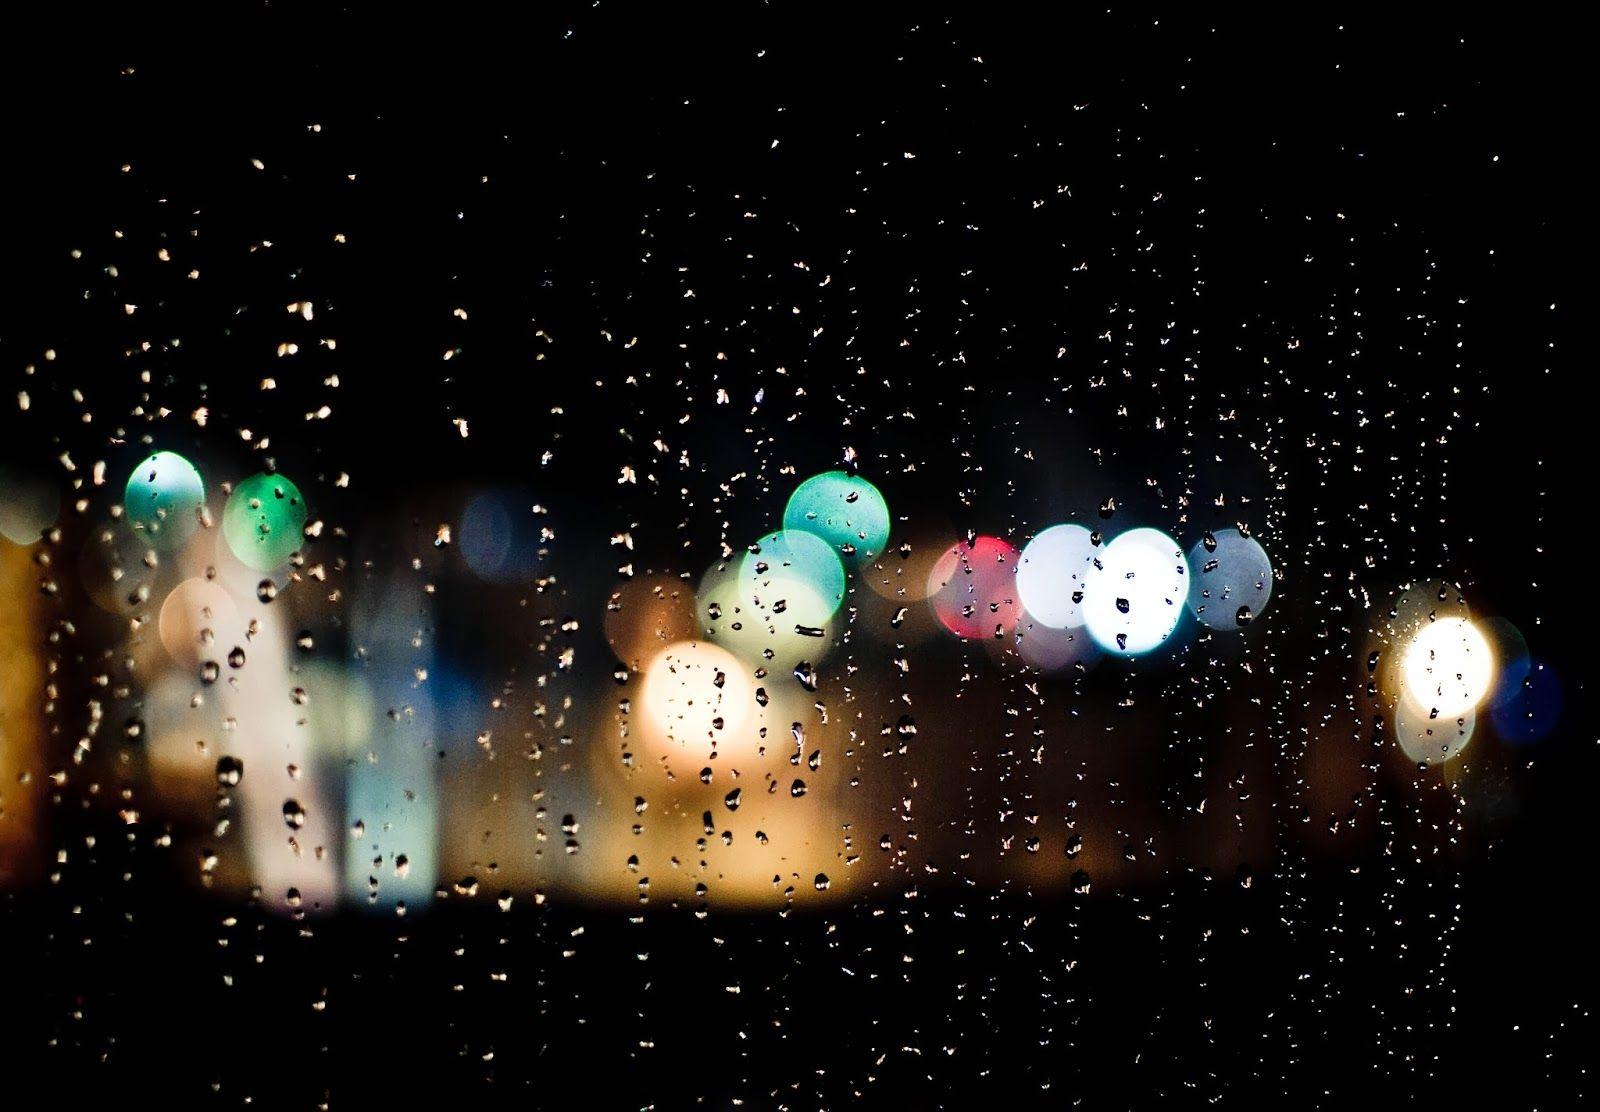 The real face of Pakistan: HD RAINY WALLPAPERS. BEST RAINY DESK TOP